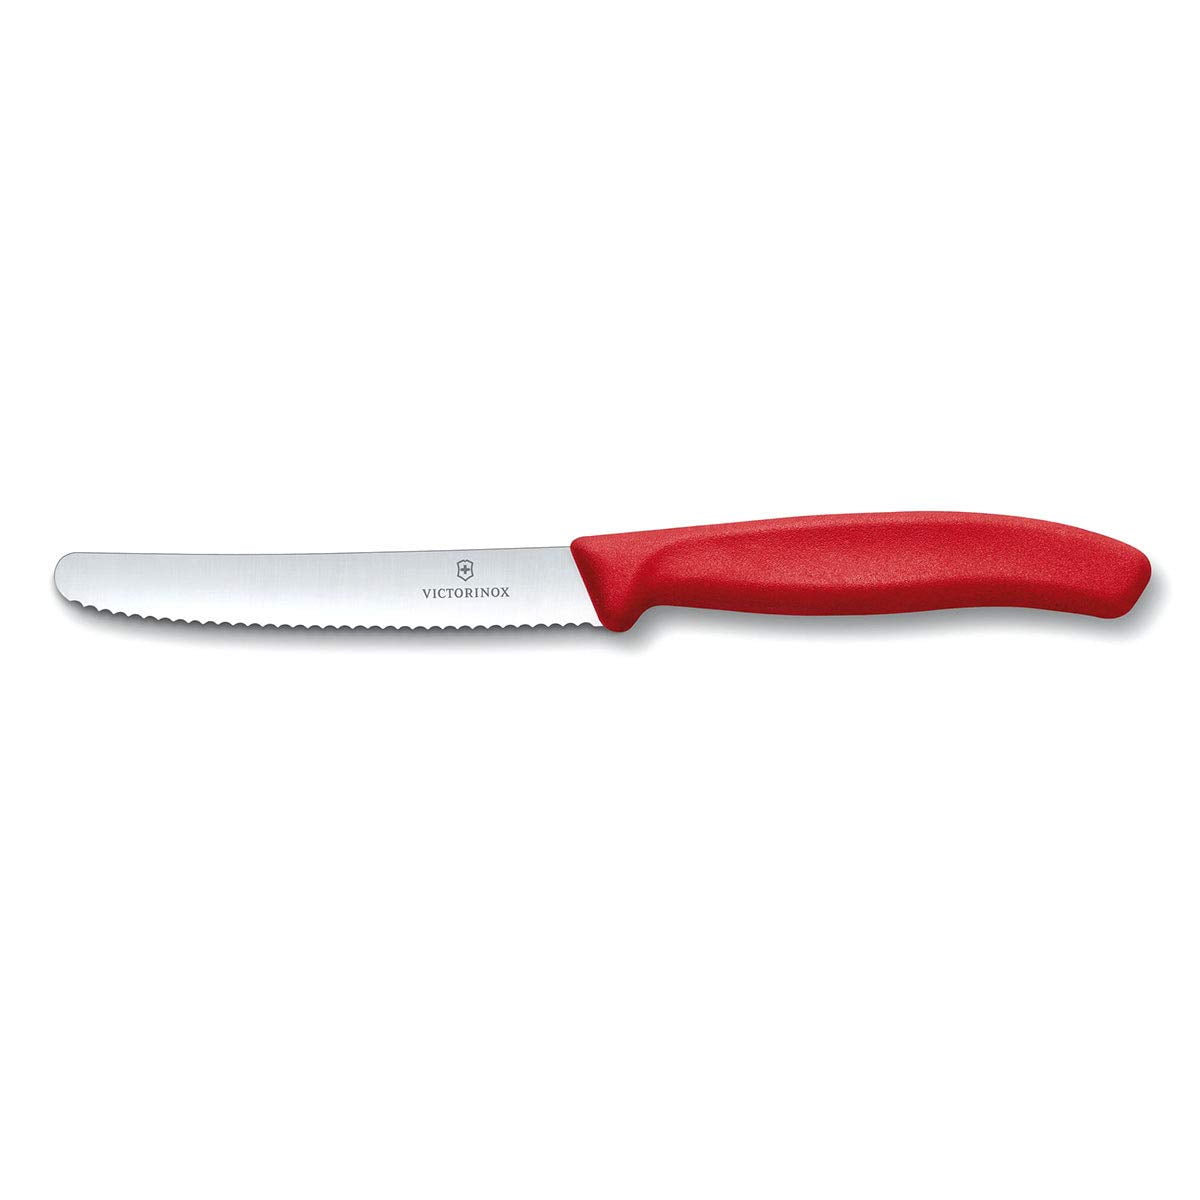 jakmell - 4 Inch Serrated Paring Knife, Utility Knife for Chopping Paring  Dicing, Stainless Steel Tomato Knife, Steak Knife with Ergonomic Handle